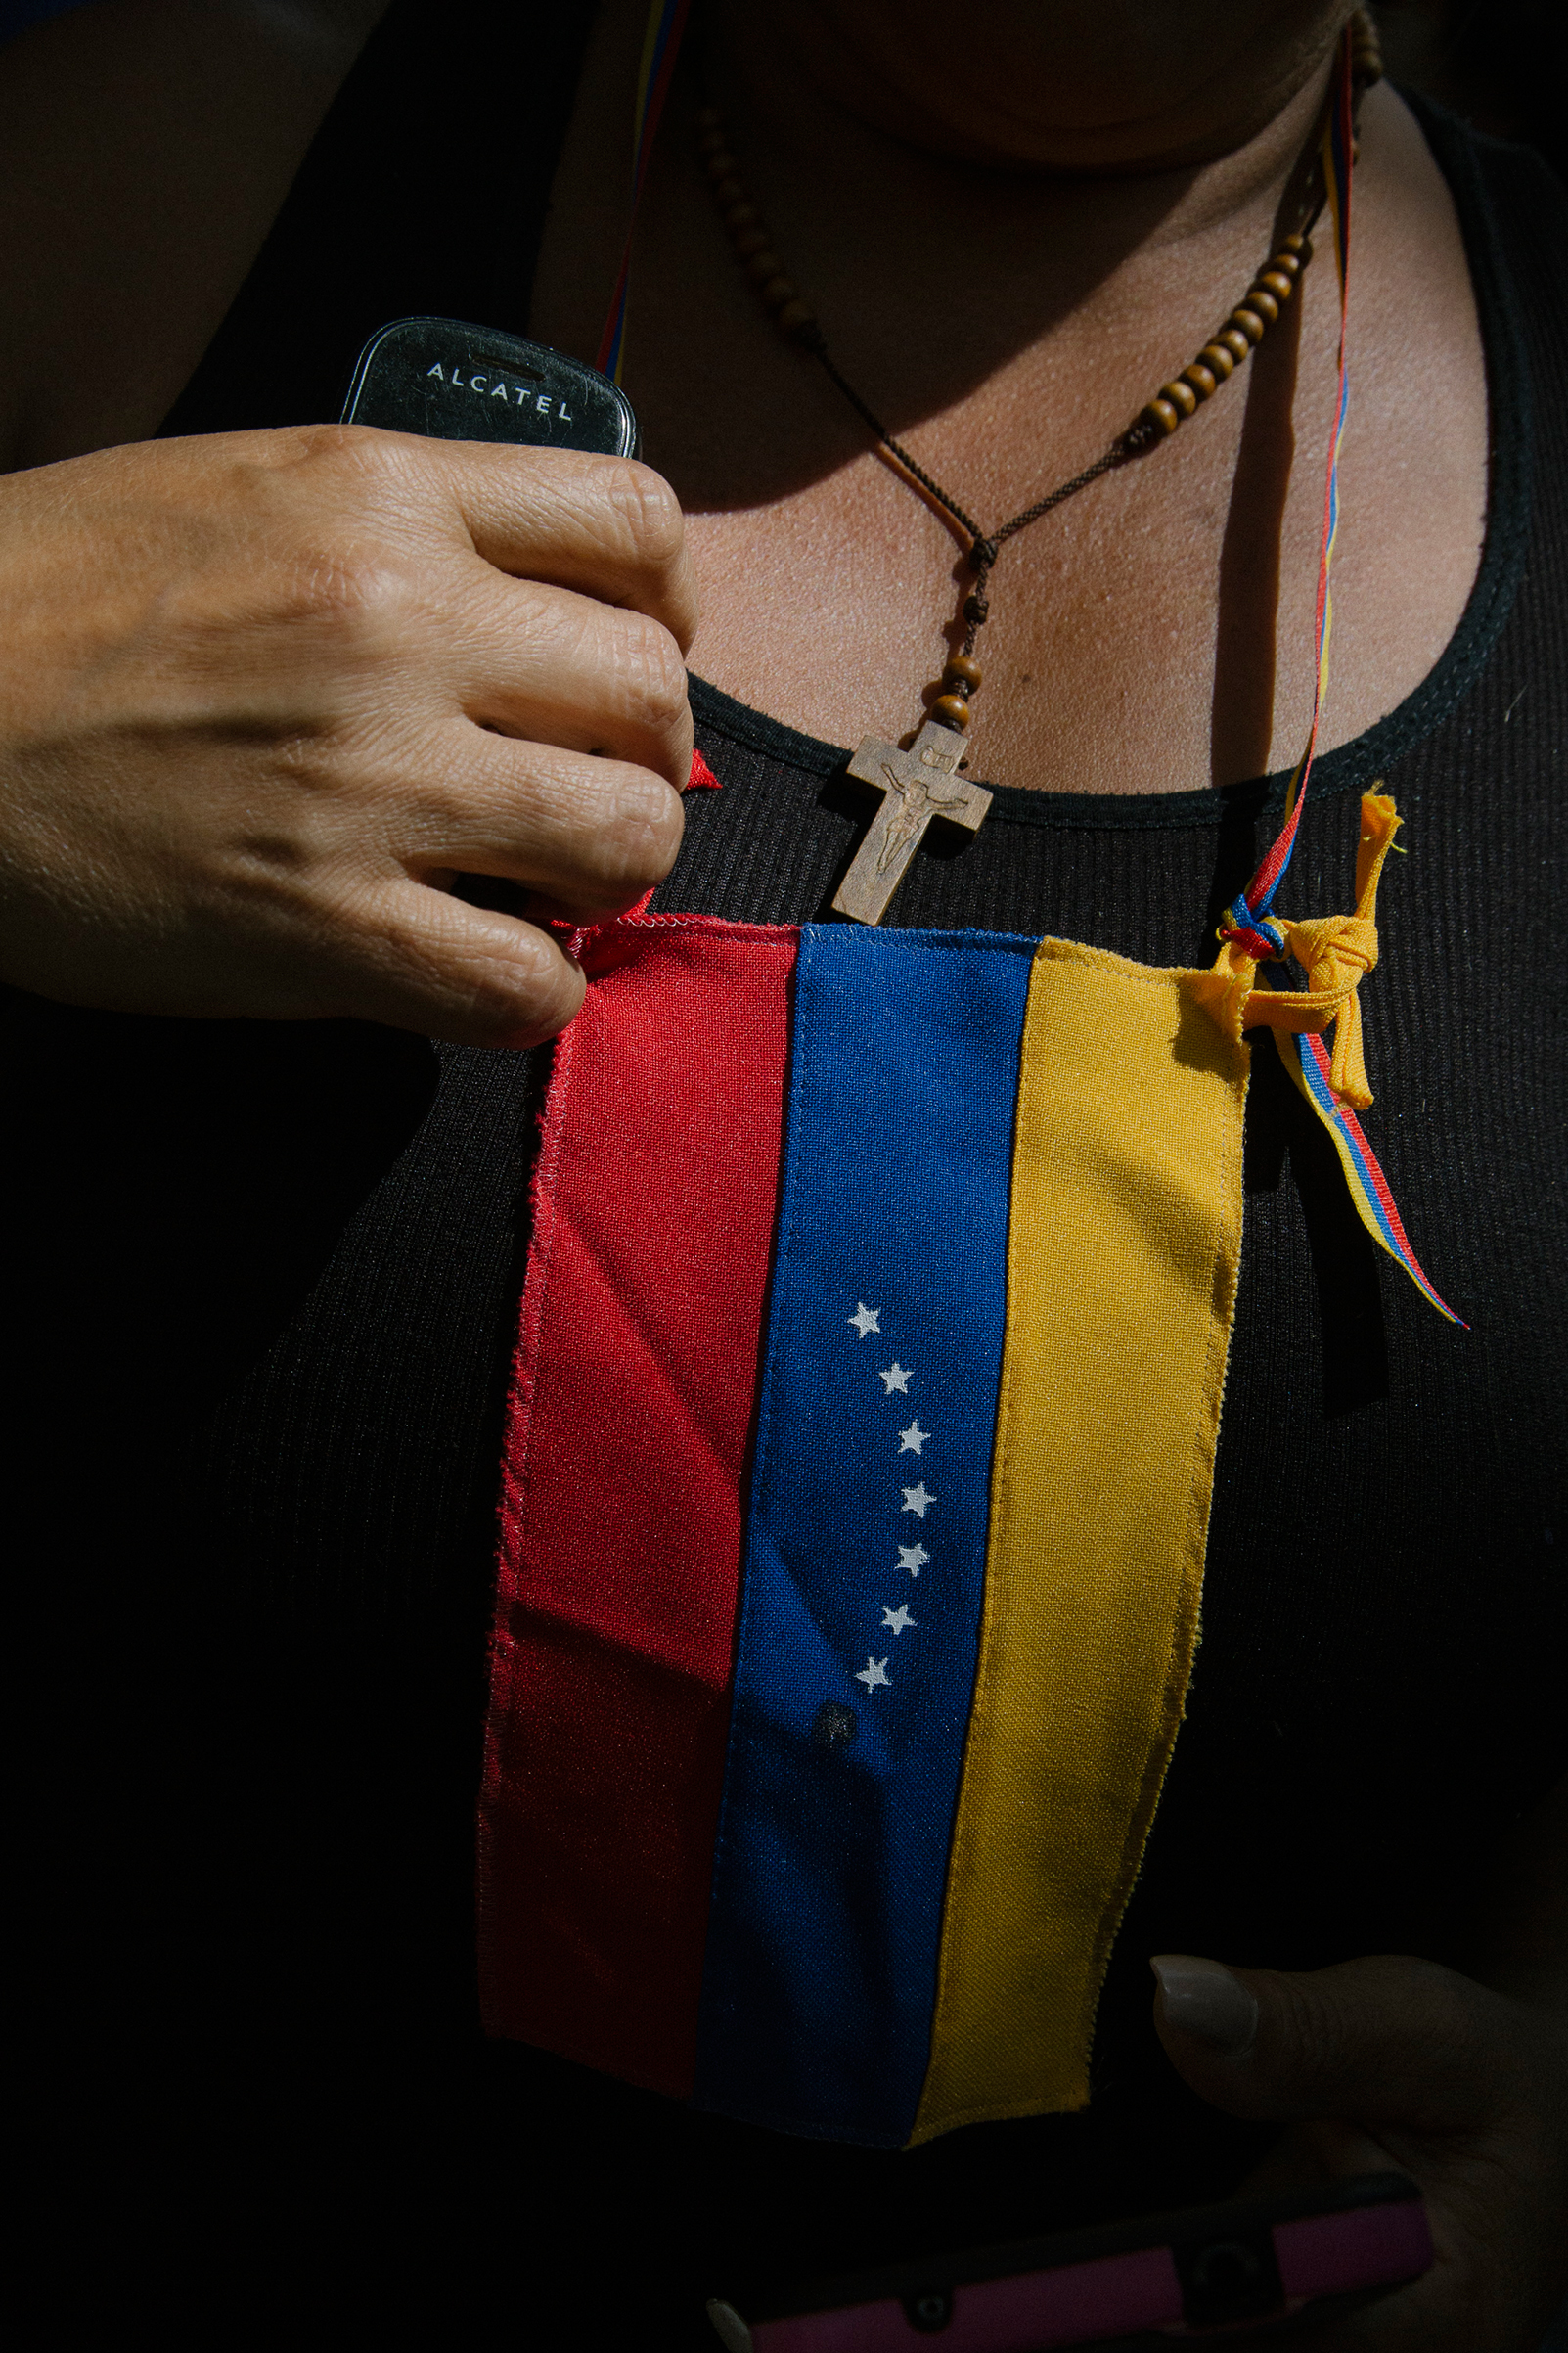 A woman fixes a flag on her chest during a news conference by Guaidó at the Bolivar Square of Chacao in Caracas on Jan. 25, 2019. (Andrea Hernandez)